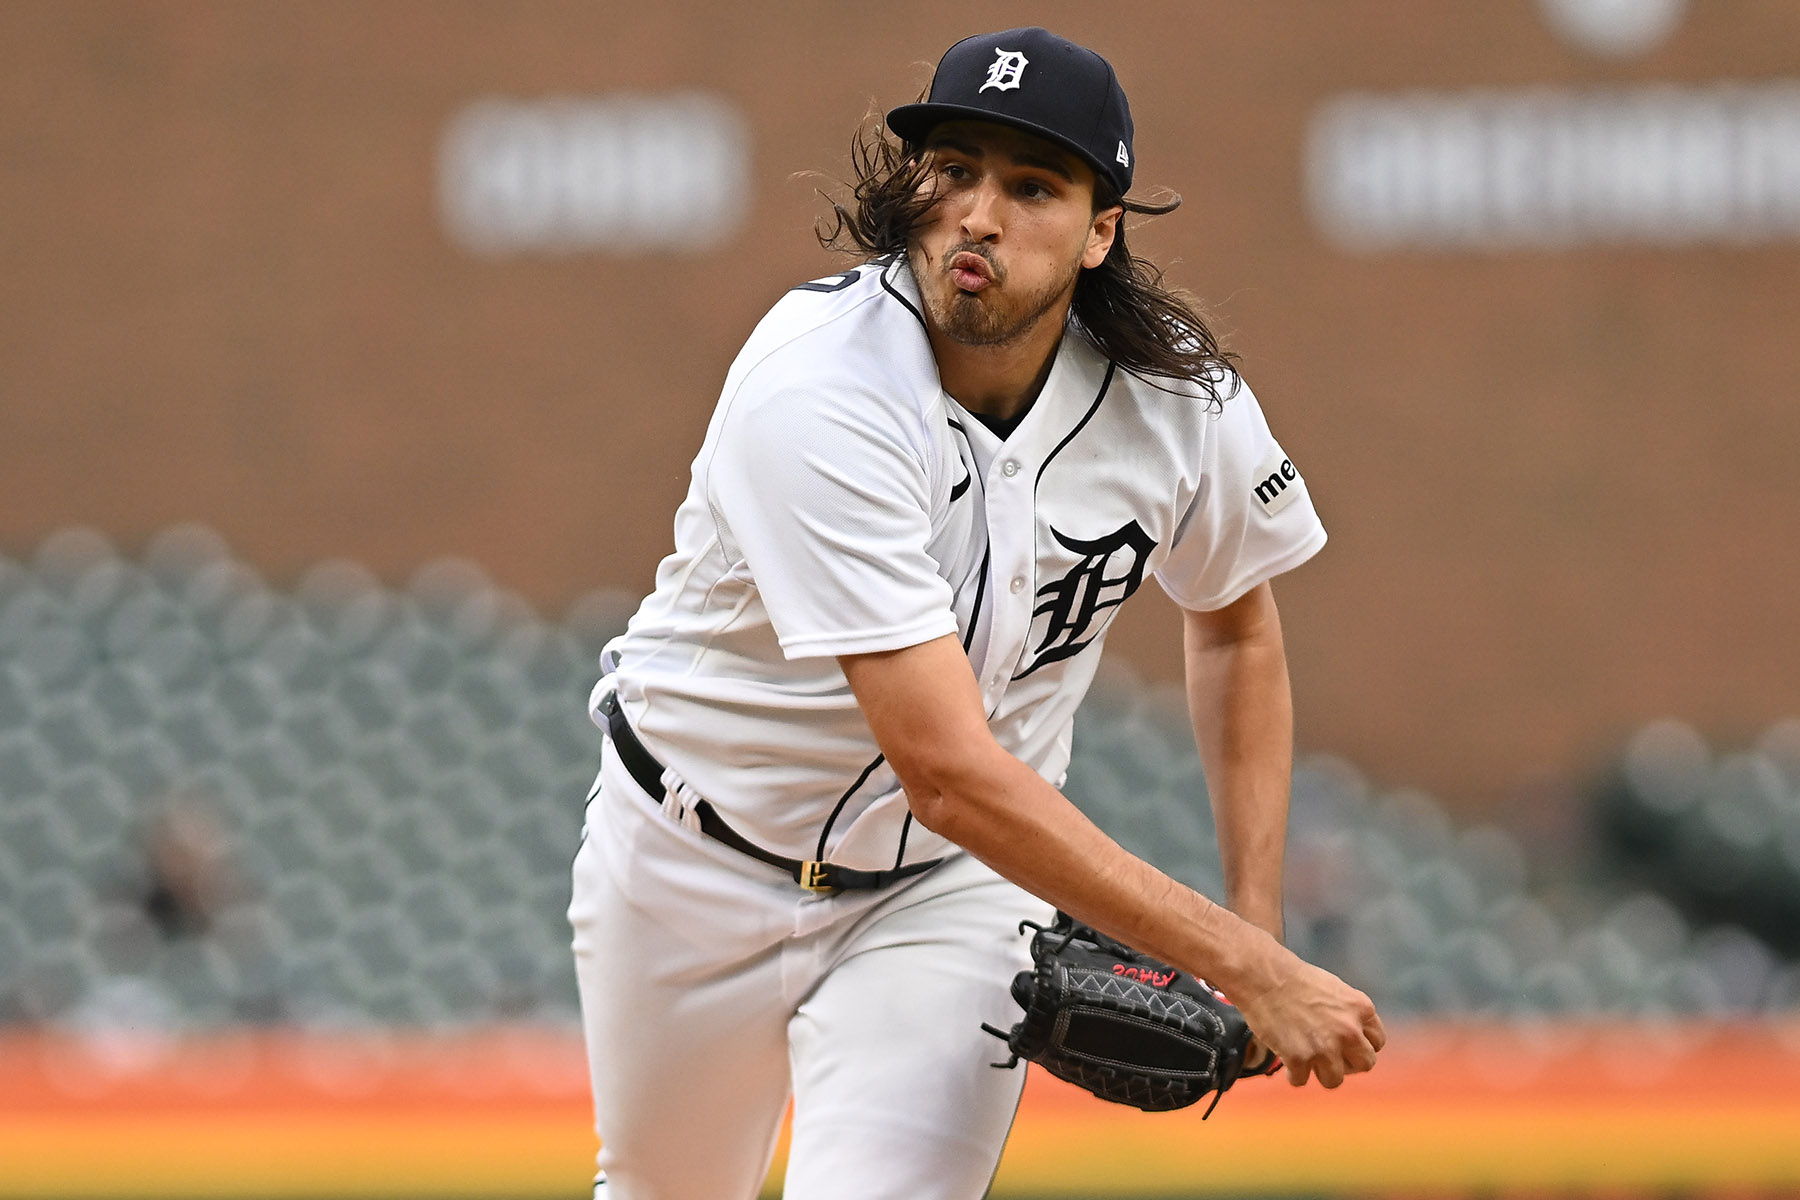 Spencer Torkelson (2 HRs), Tigers topple Twins